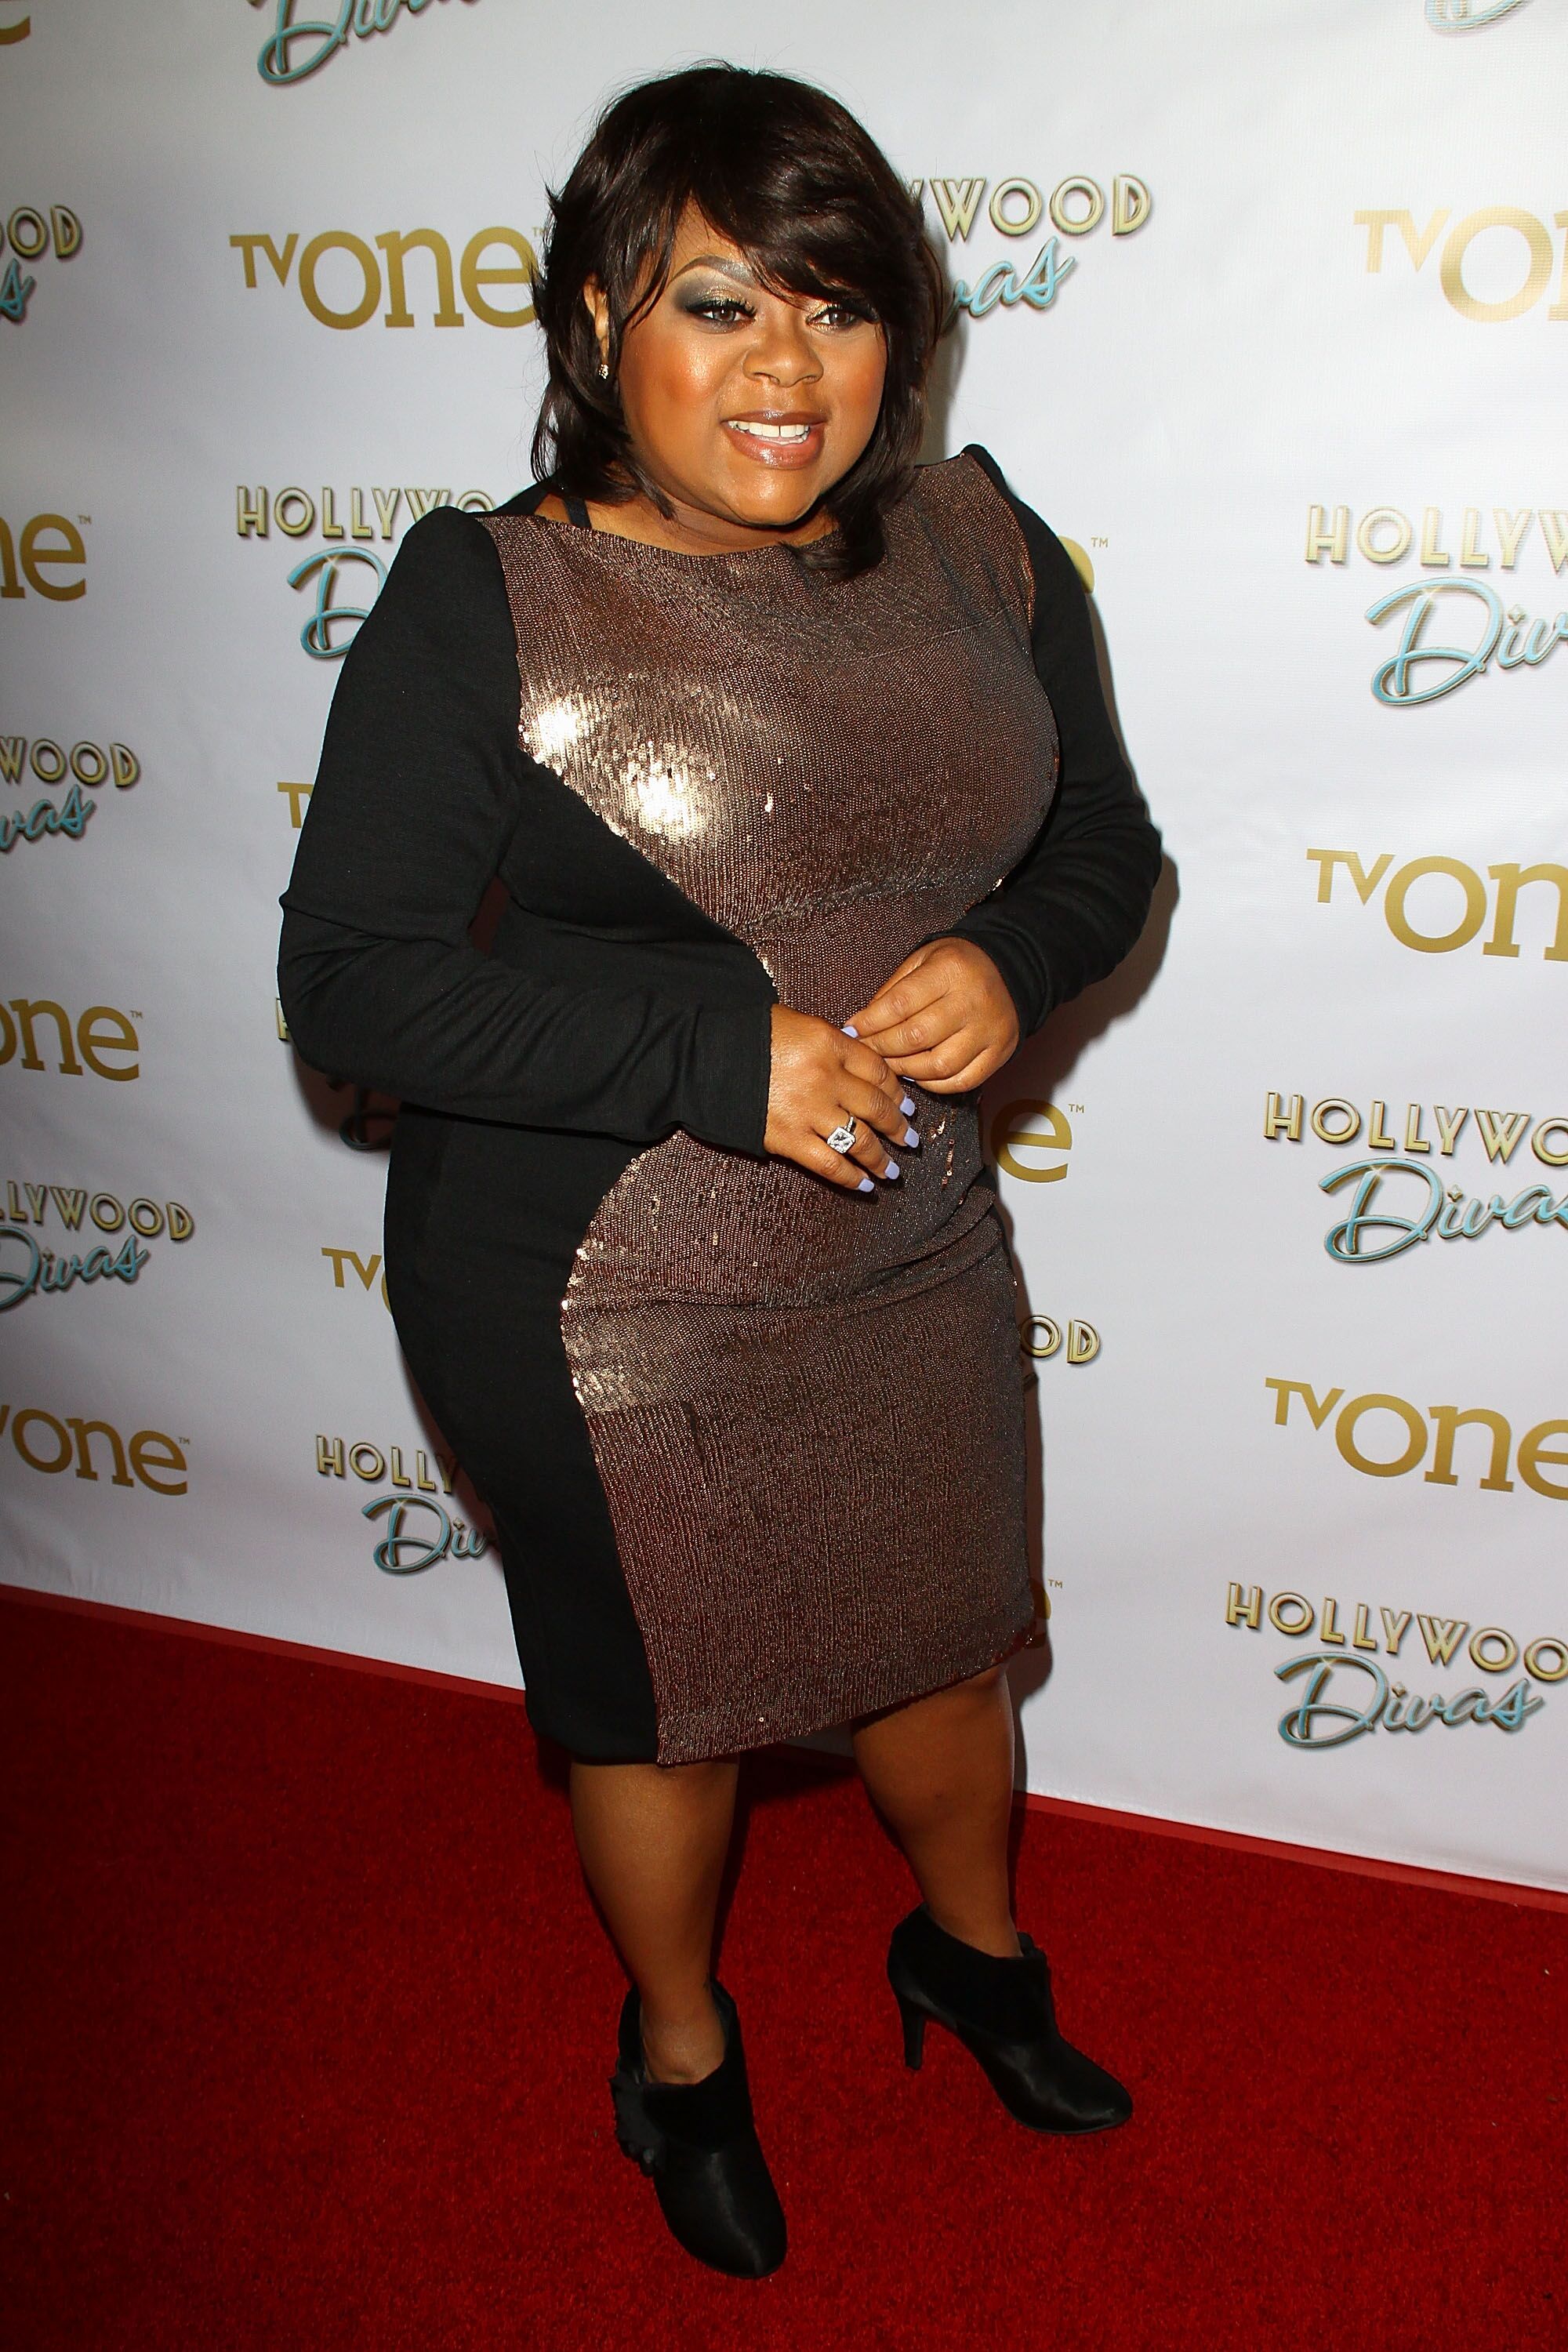 Countess Vaughn arrives at the premiere party for TV One's "Hollywood Divas" on October 7, 2014. | Photo: Getty Images